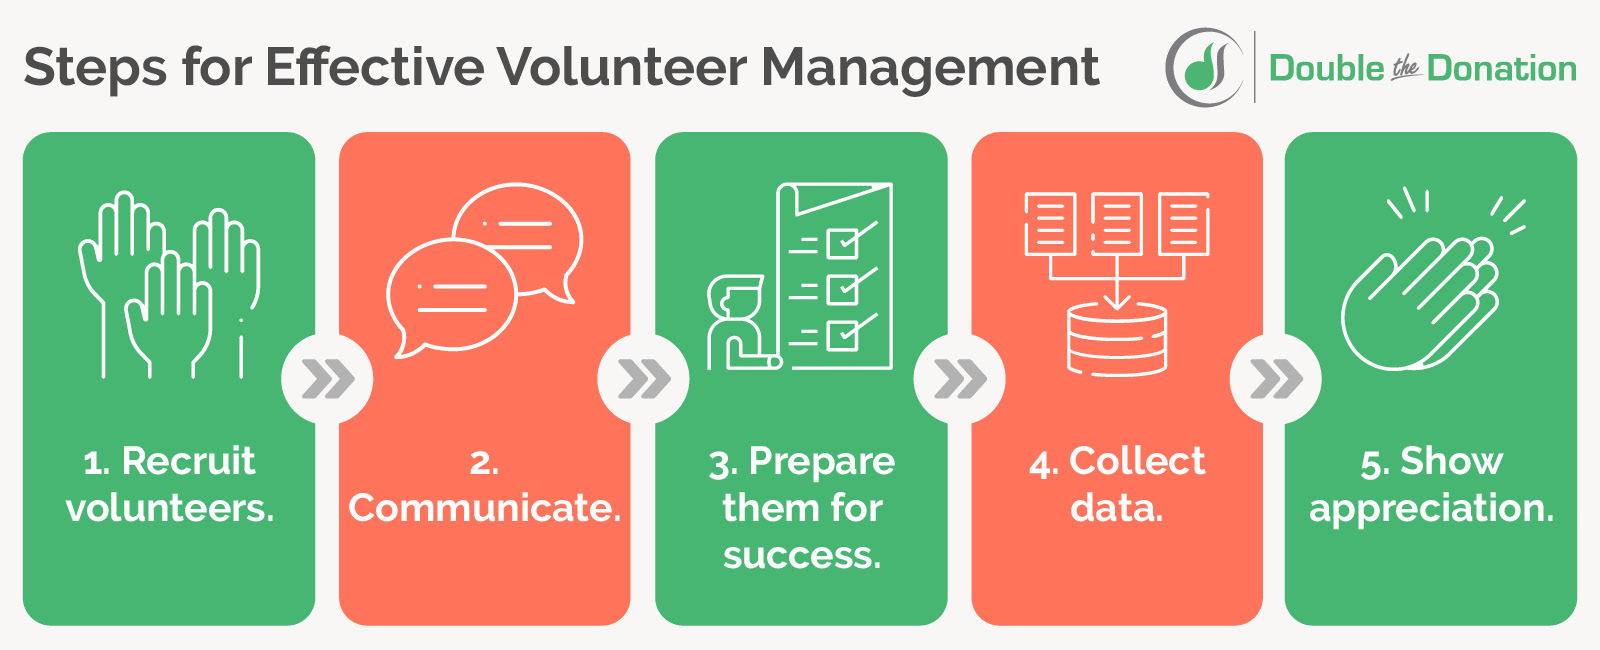 This image lists the five steps for effective volunteer management described in the content below.